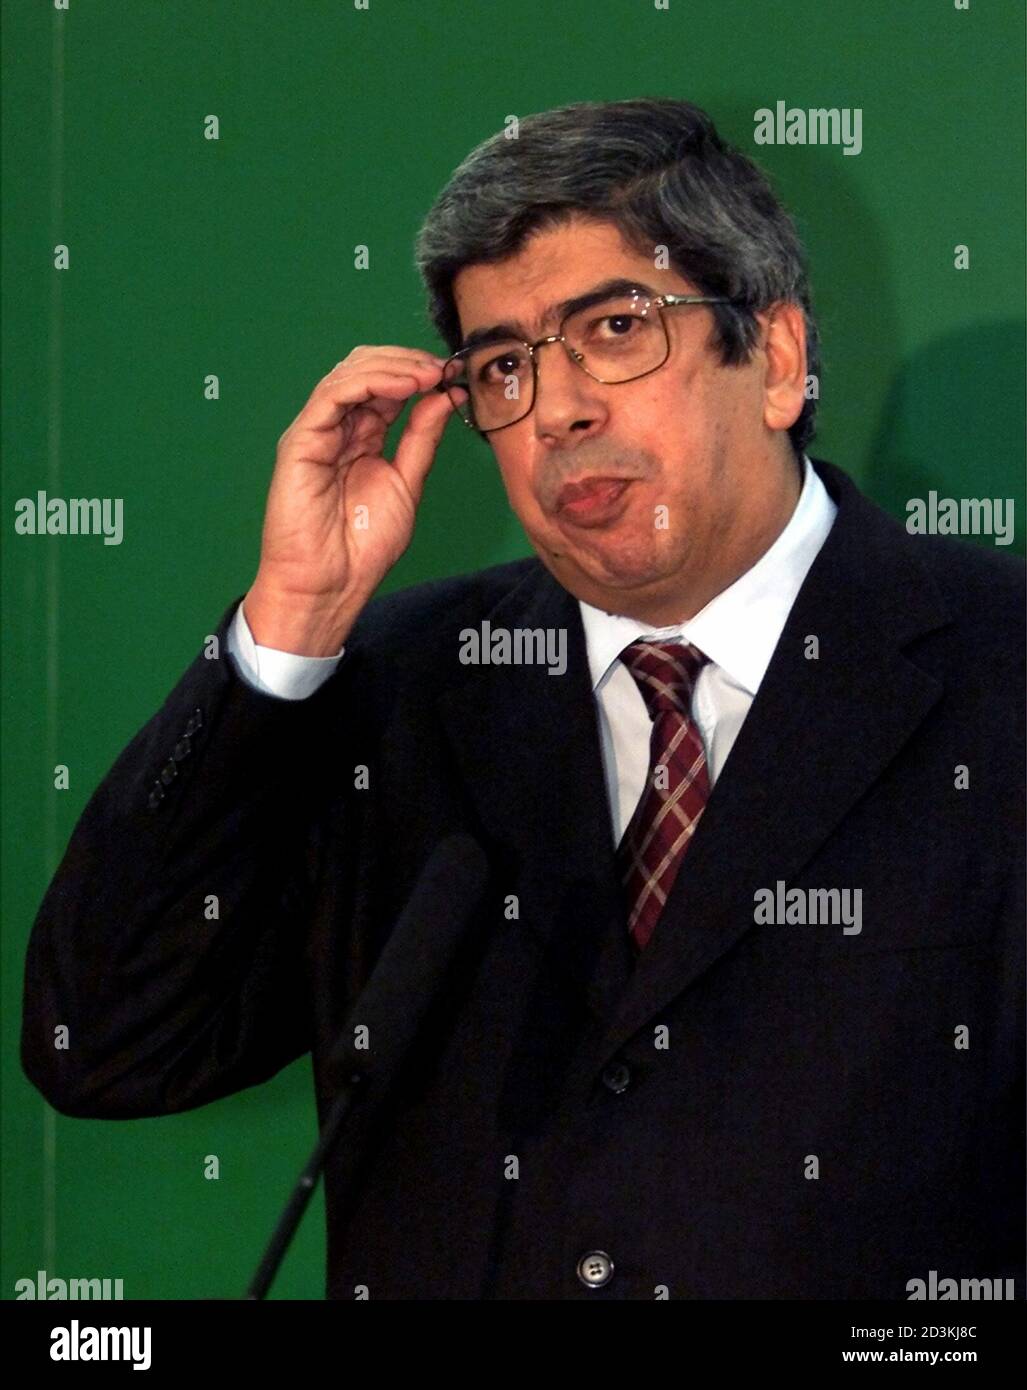 Portuguese Public Works Minister Ferro Rodrigues adjusts his glasses  announcing the candidature to the leadership of the Socialist Party  December 21, 2001. Rodrigues said he will seek a clear majority in early